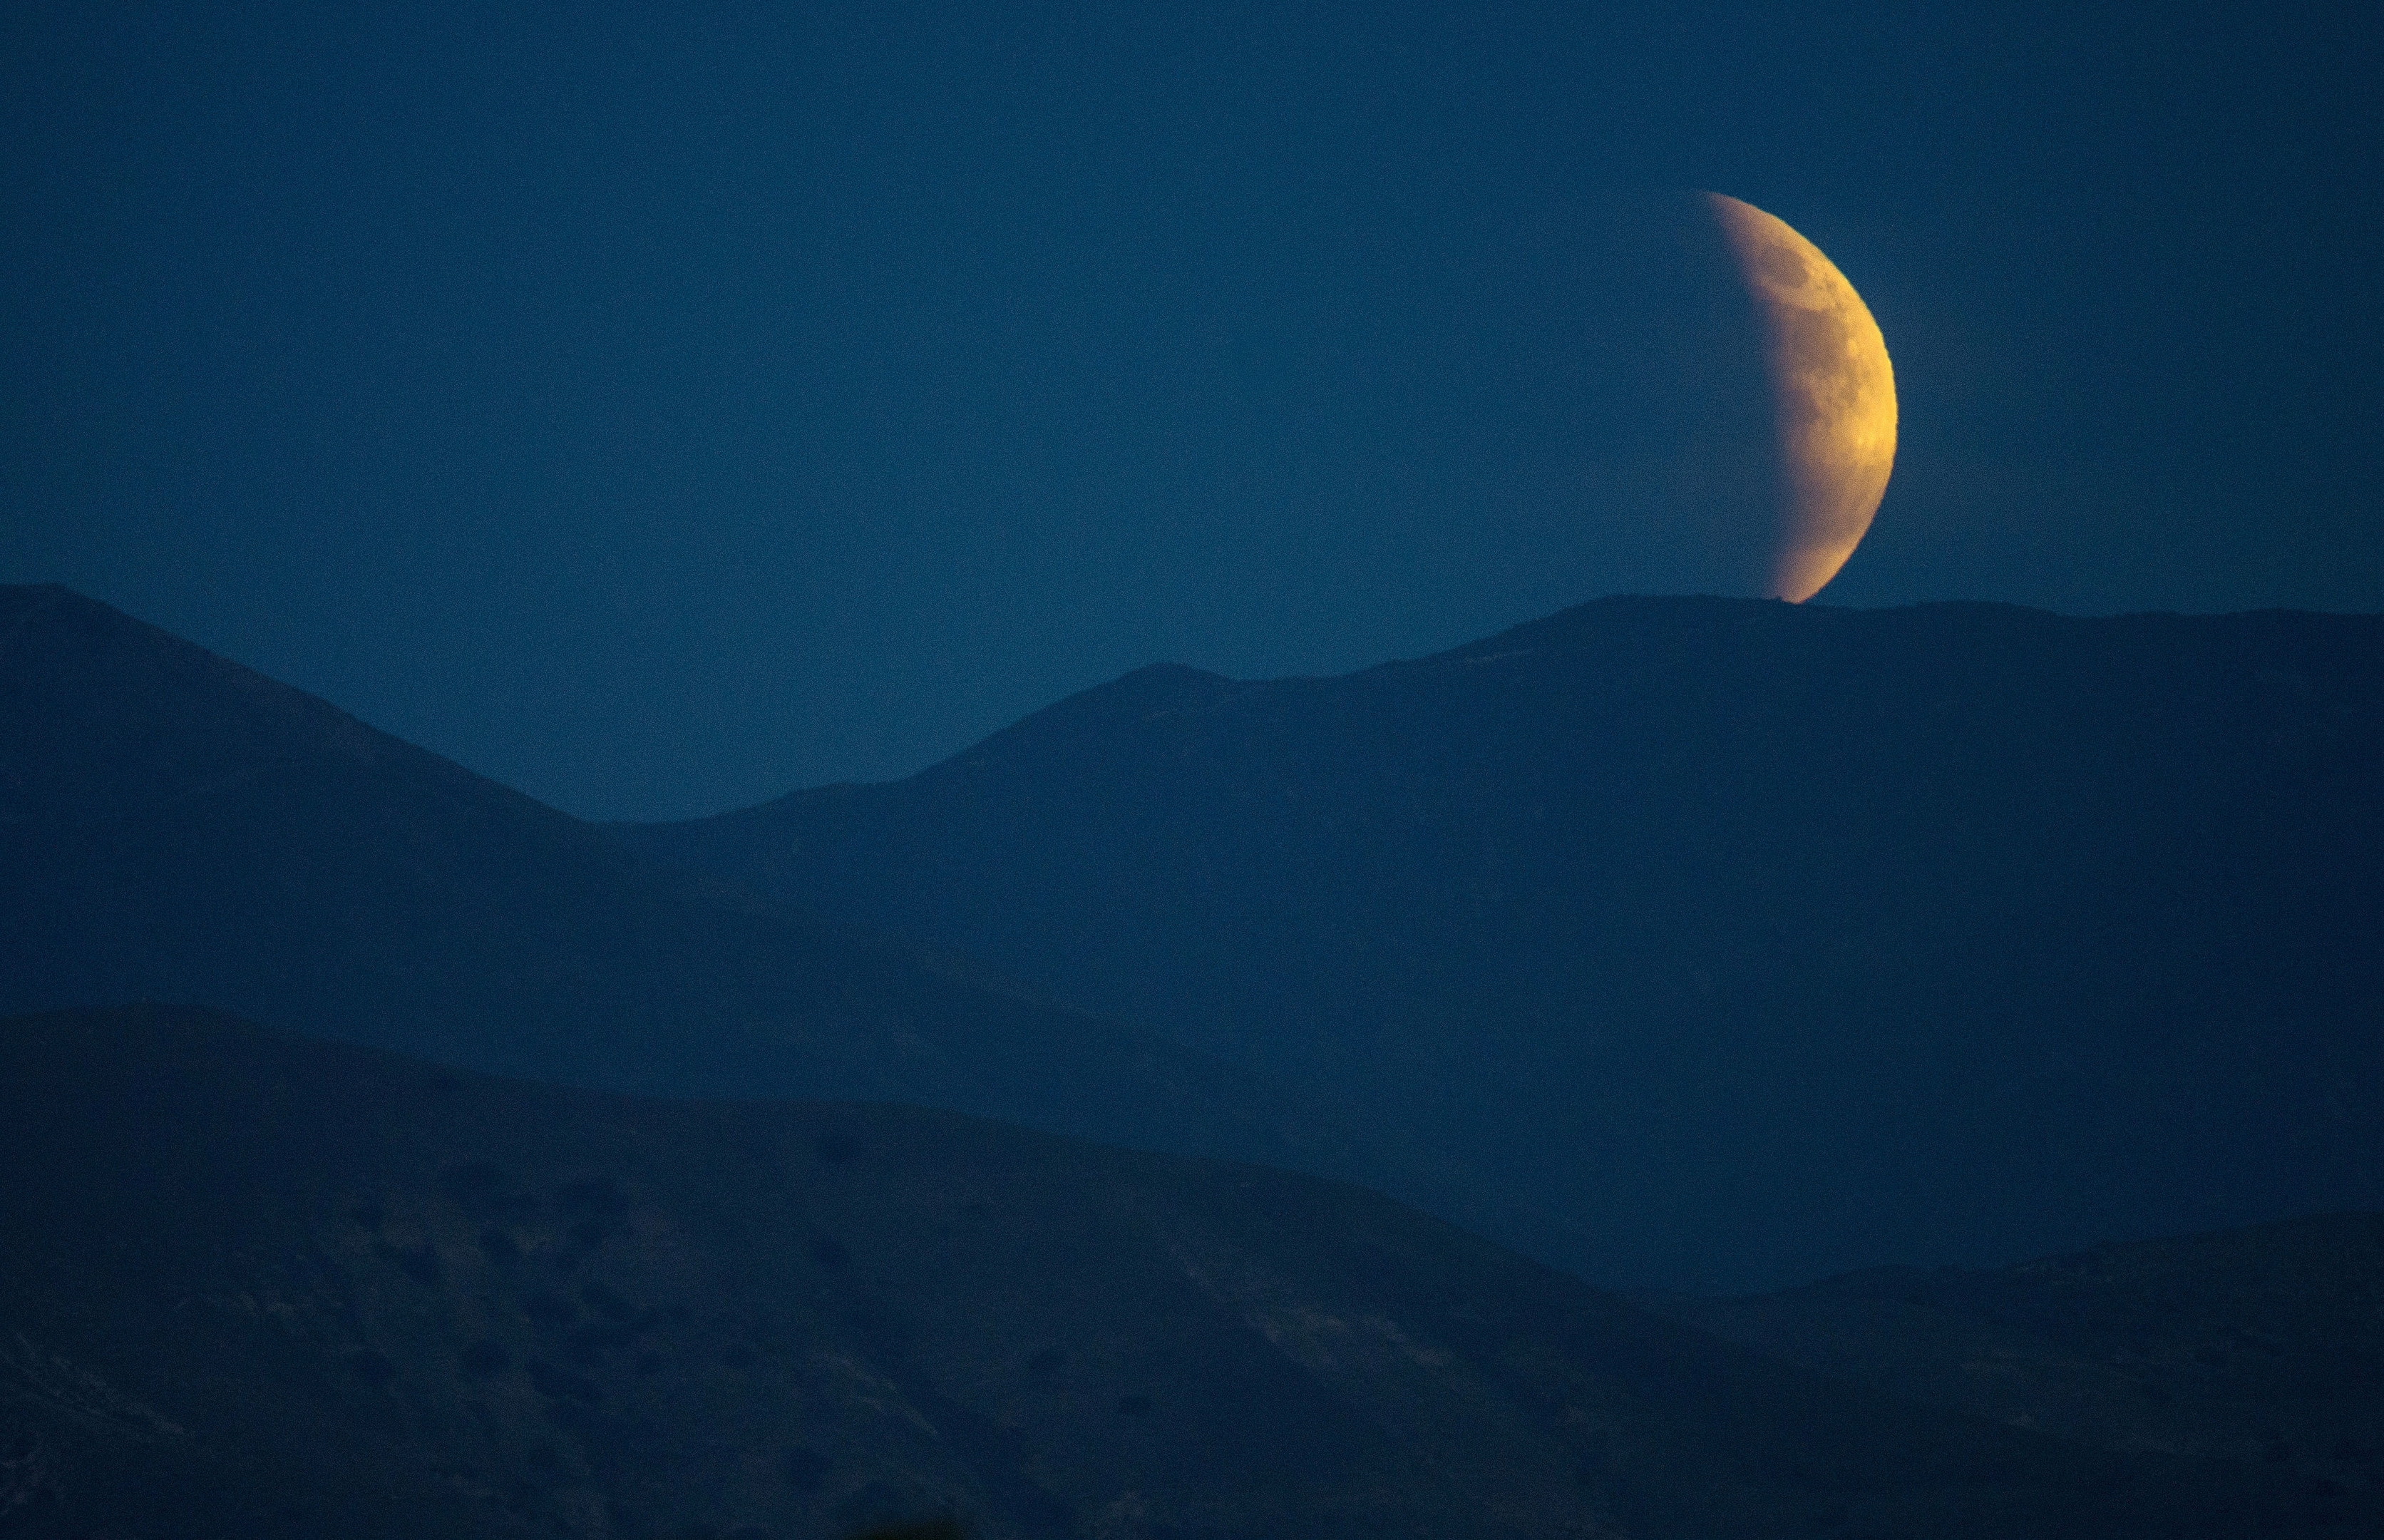 Earth's shadow begins to obscure the view of a so-called supermoon during a total lunar eclipse over the eastern hills of Orange County in California,